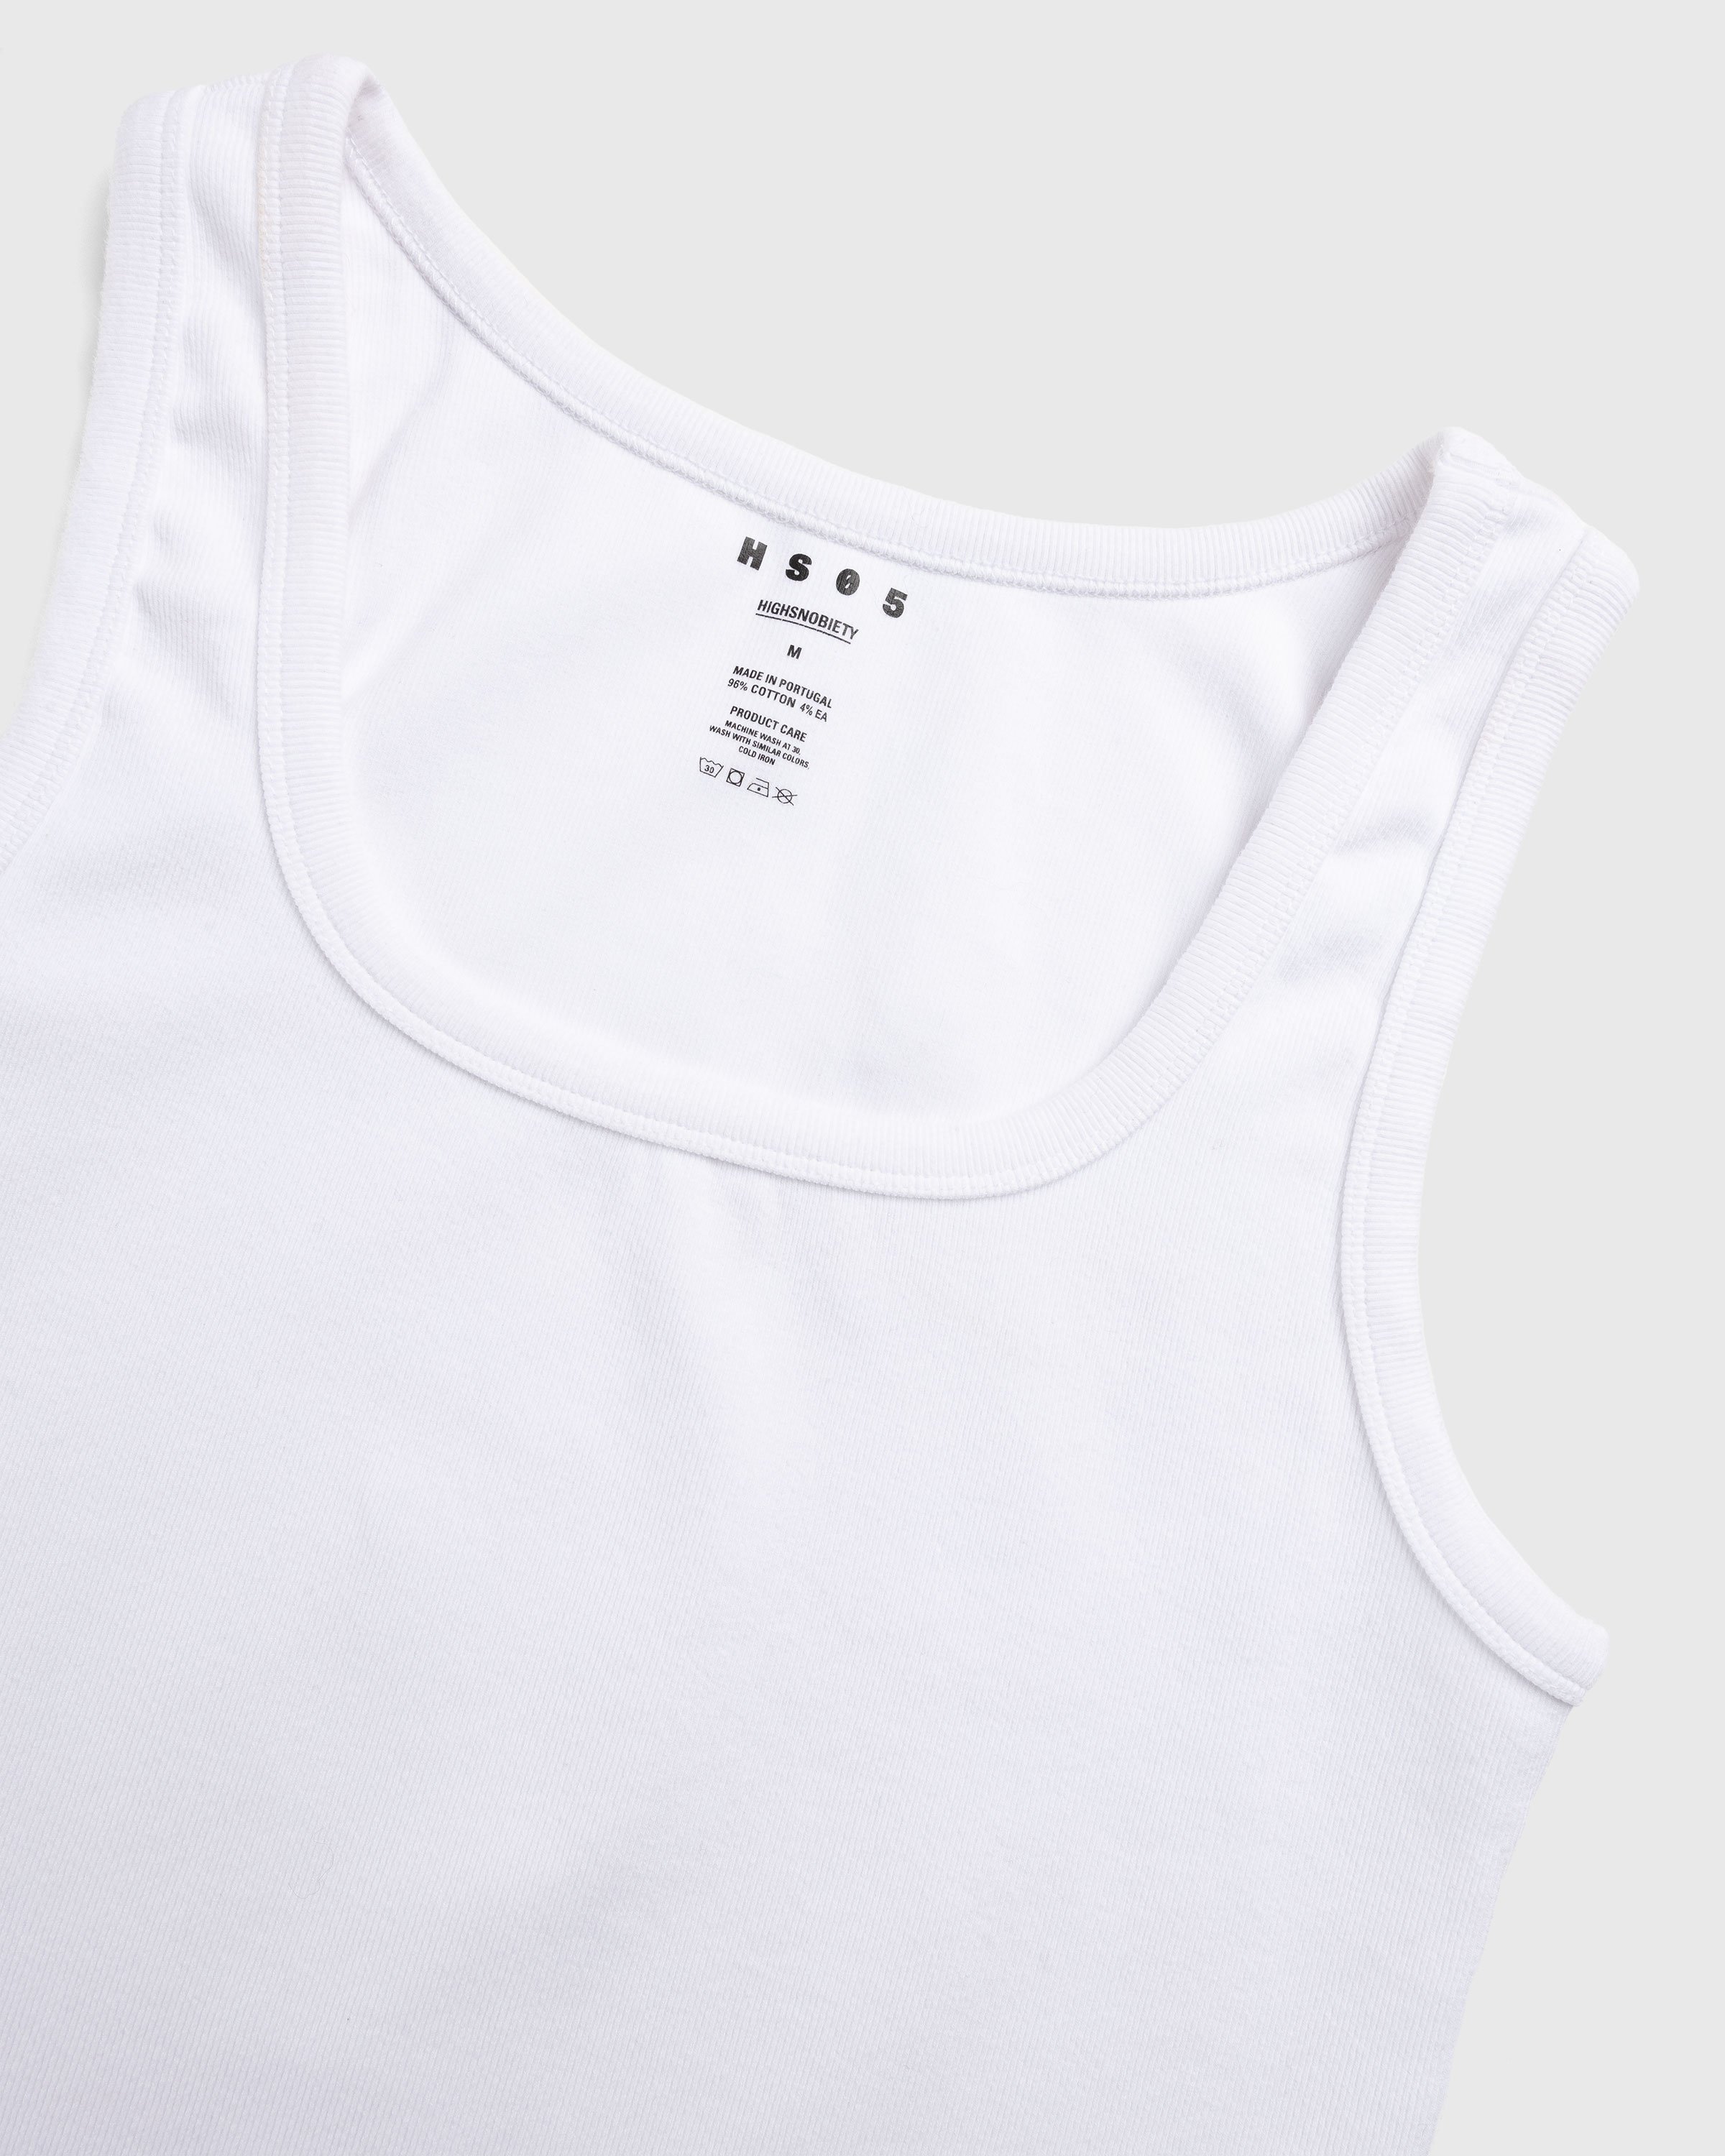 Highsnobiety HS05 - 3 Pack Tank Top White - Clothing - White - Image 6